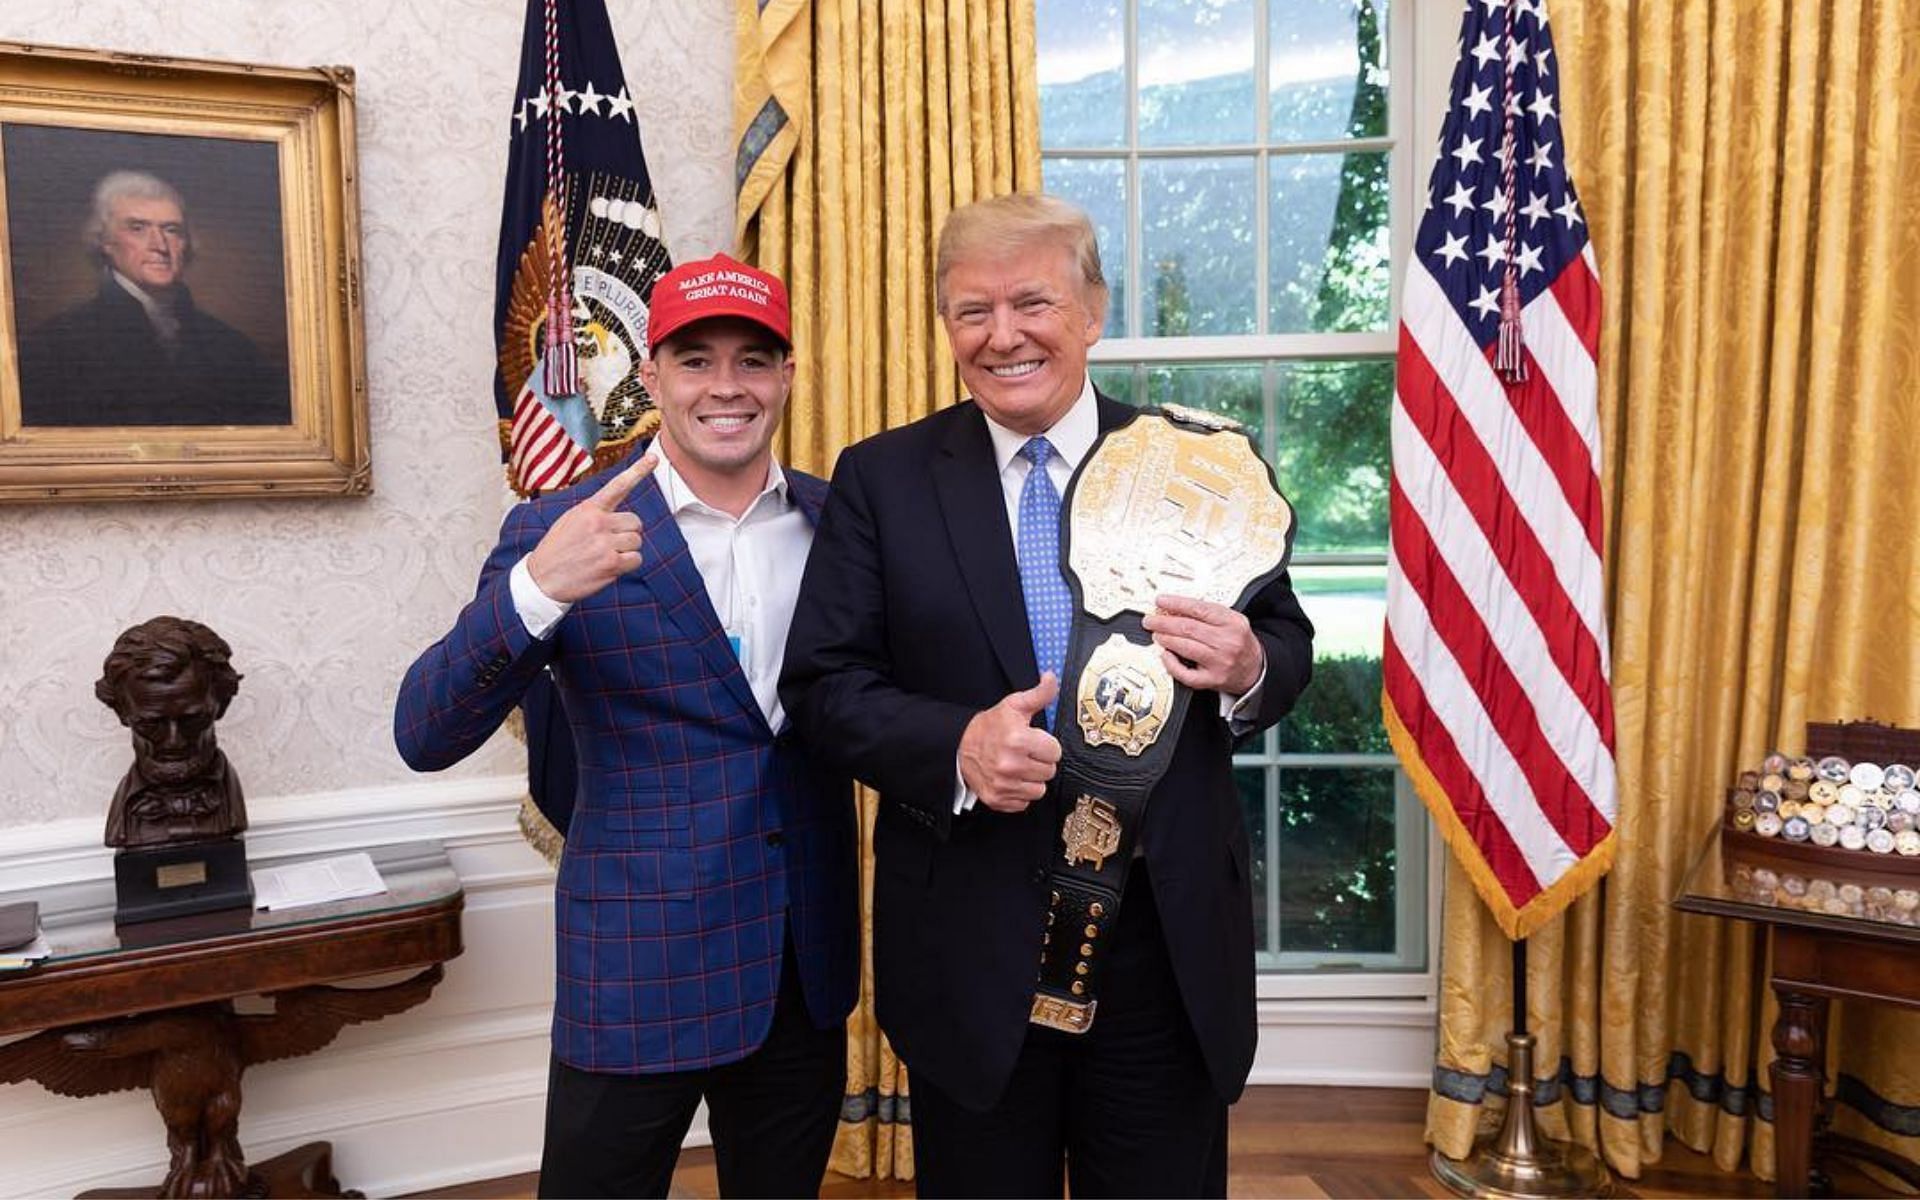 Colby Covington with former US president Donald Trump [Image credits: @colbycovmma on Instagram]